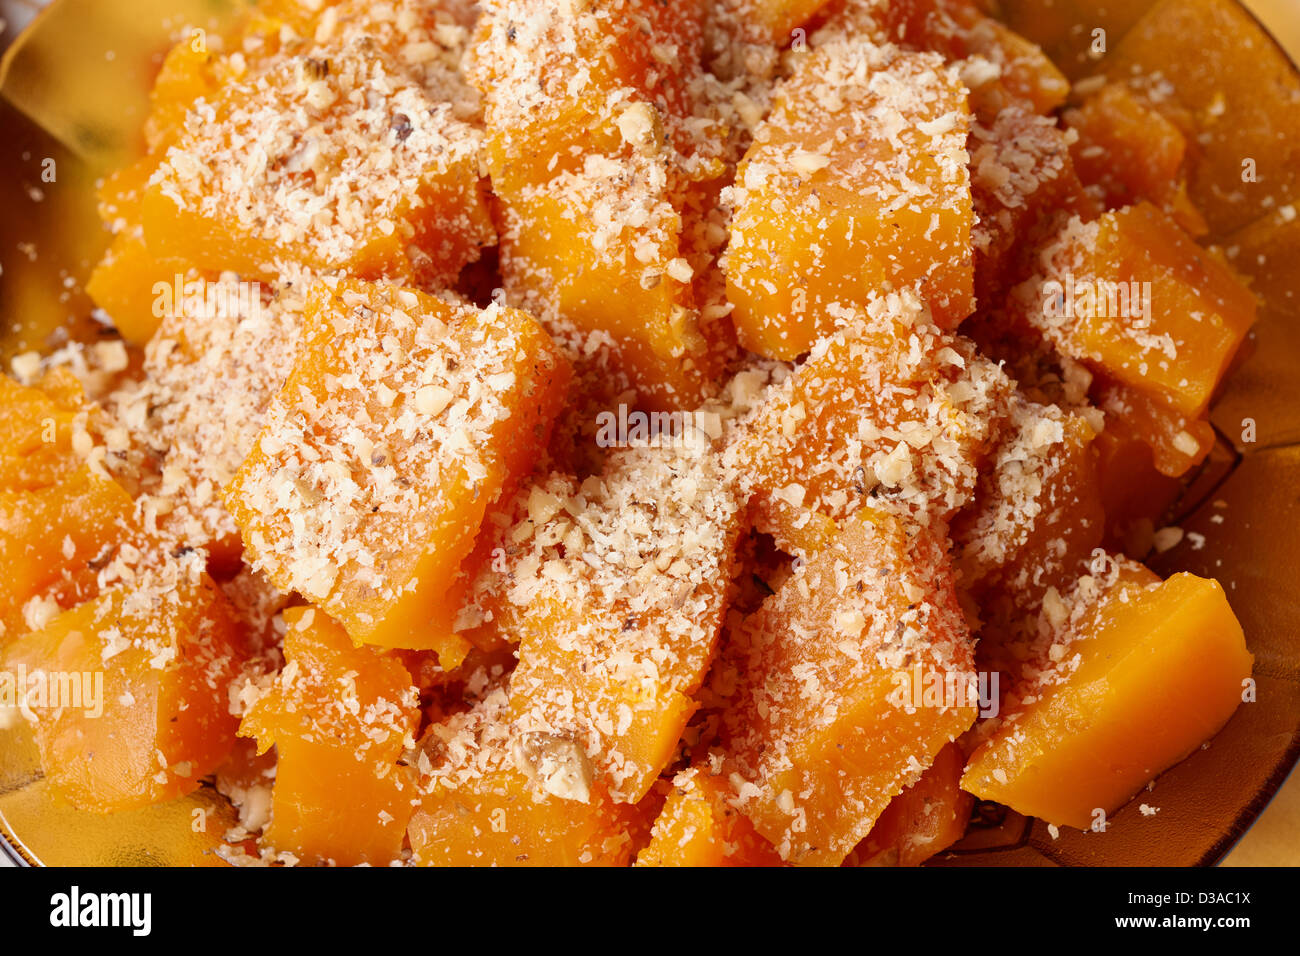 Traditional Bulgarian Christmas vegetarian food - boiled pumpkin with walnuts on holiday table Stock Photo